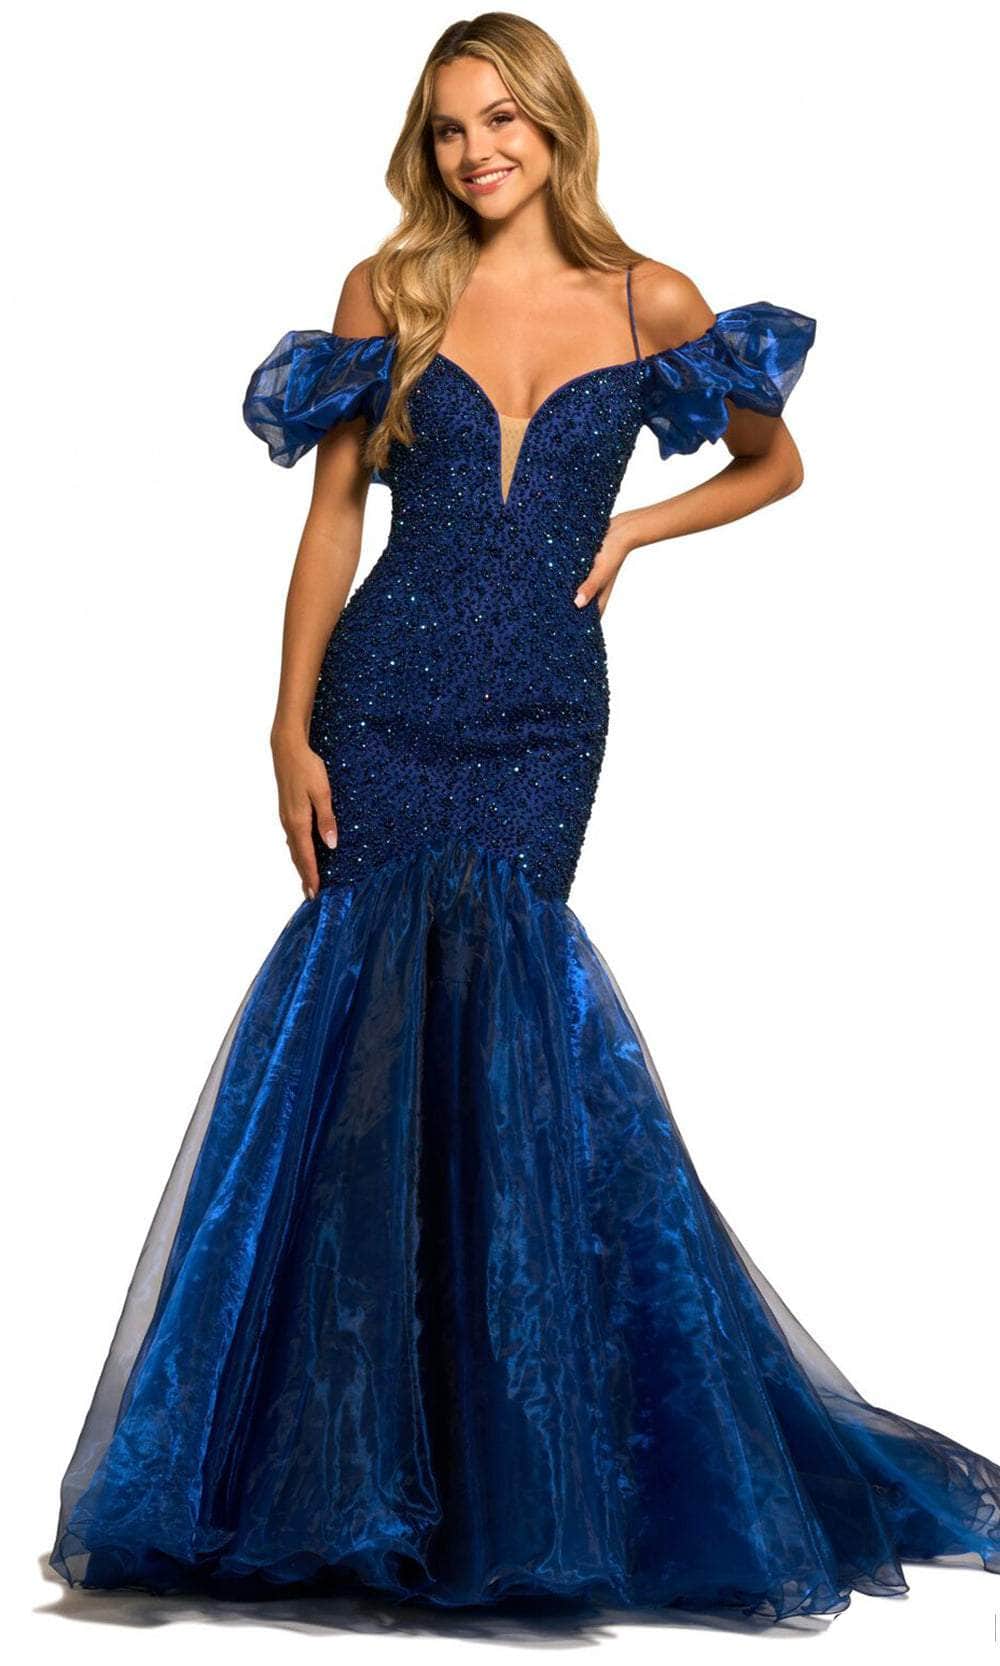 Image of Sherri Hill 55422 - Off Shoulder Beaded Prom Gown